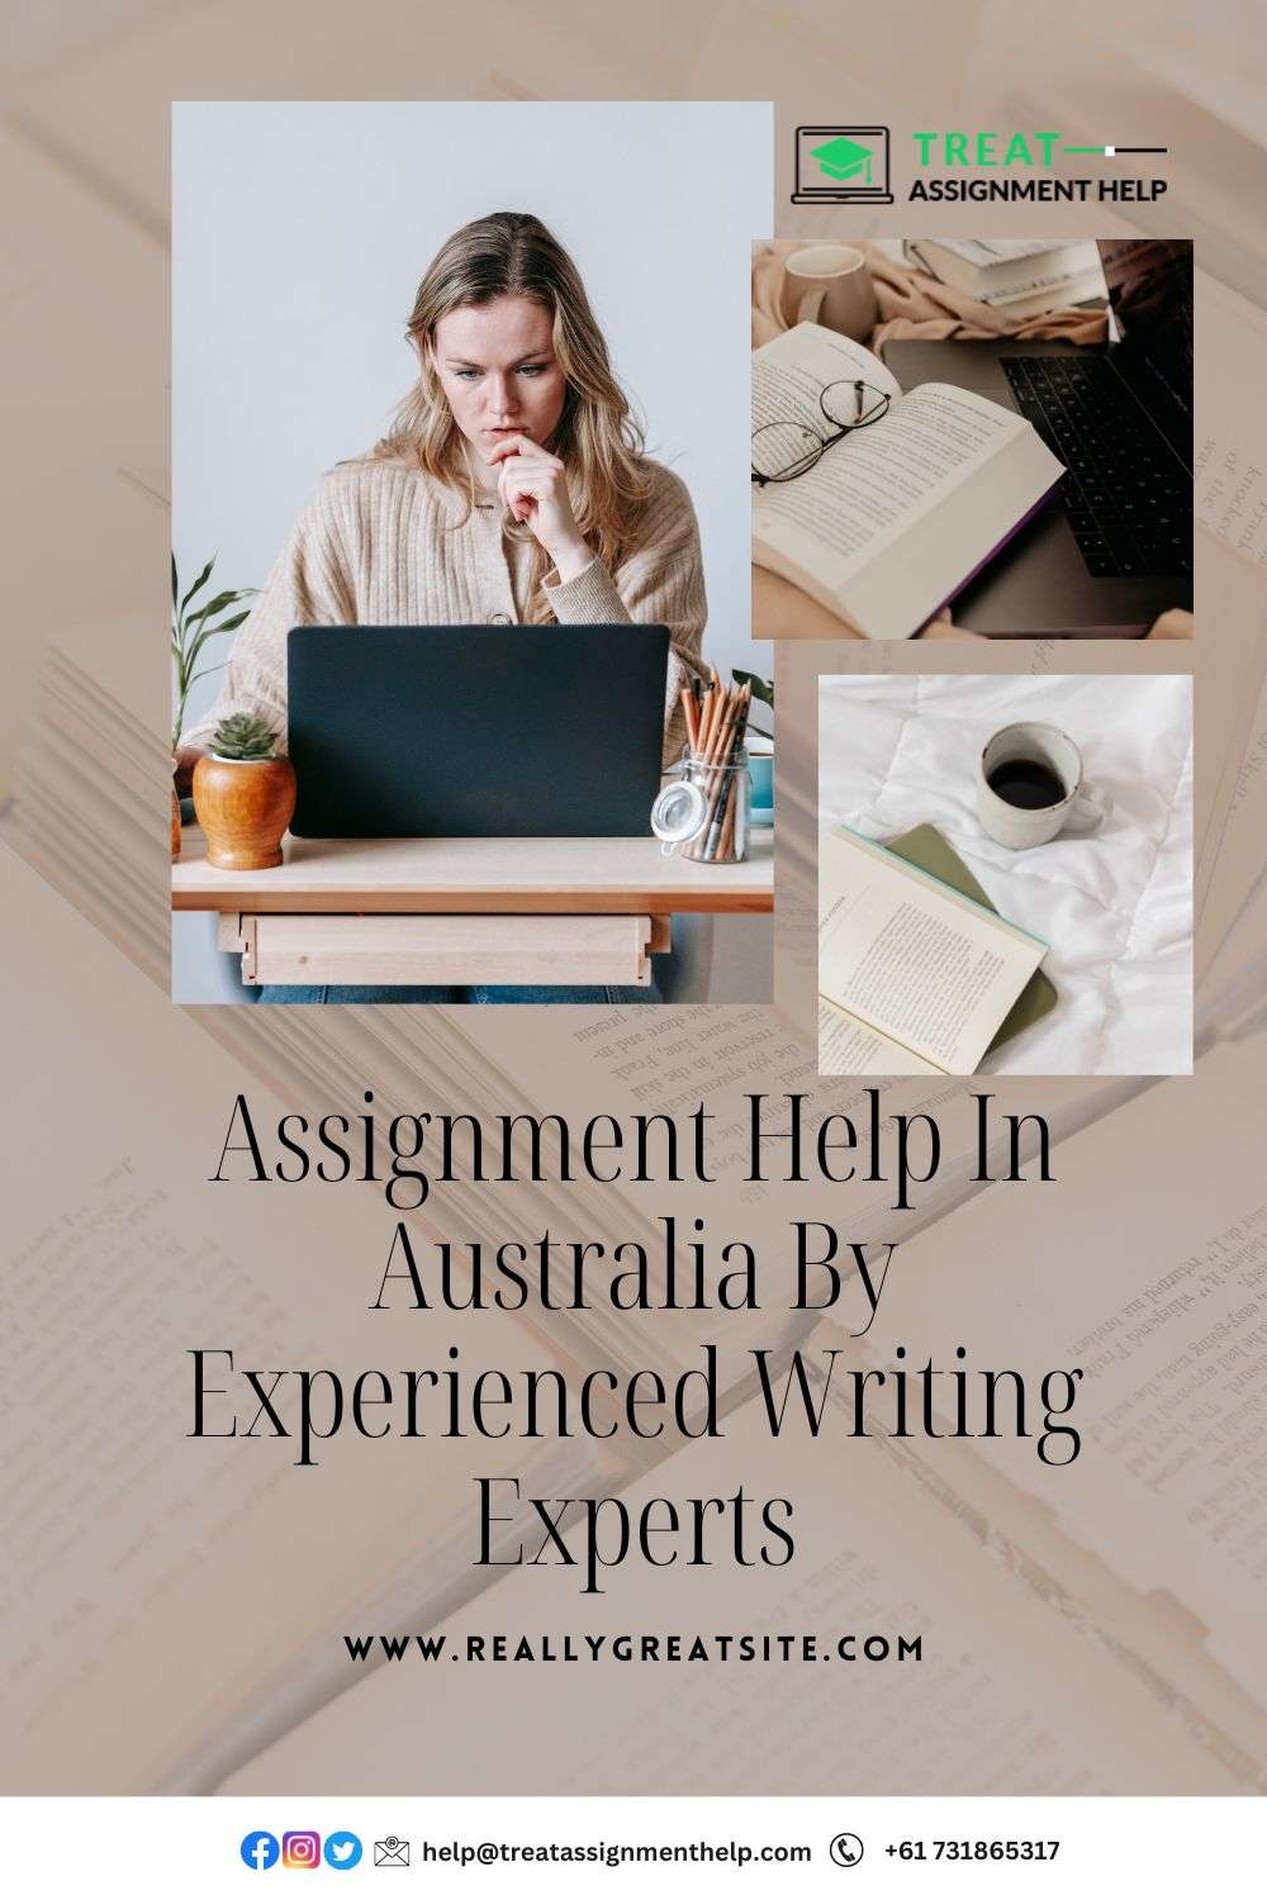 Assignment Help In Australia By Experienced Writing Experts